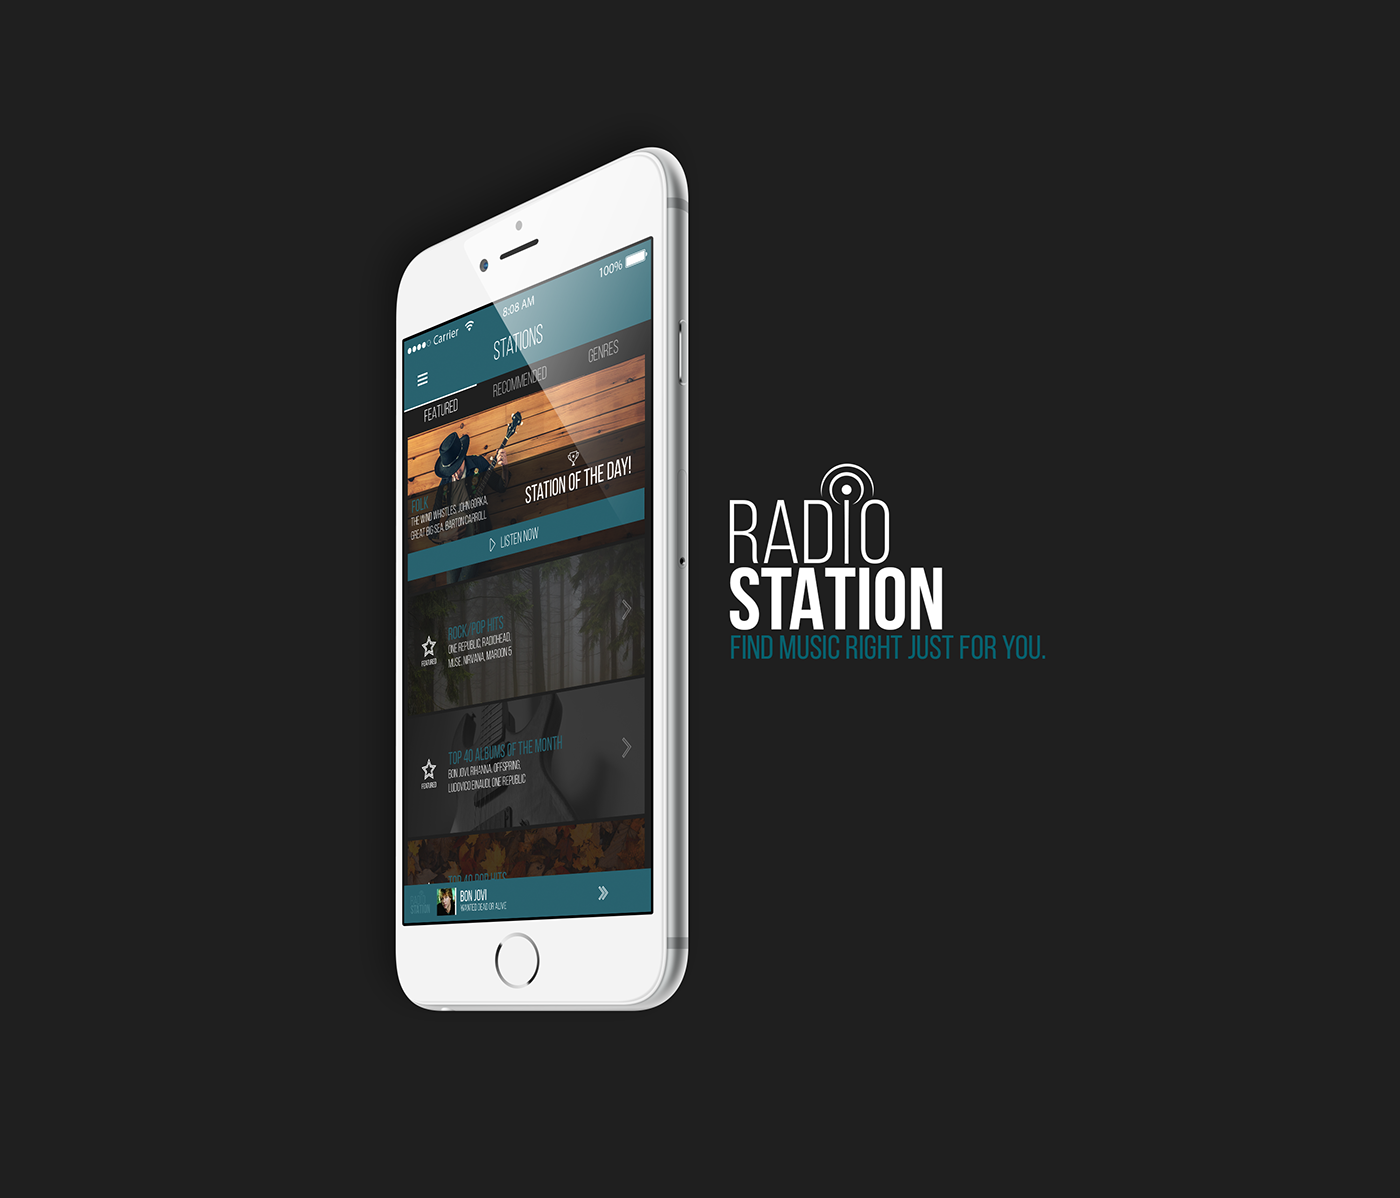 UI ux mobile ios iphone app graphics user experience user interface Radio STATION